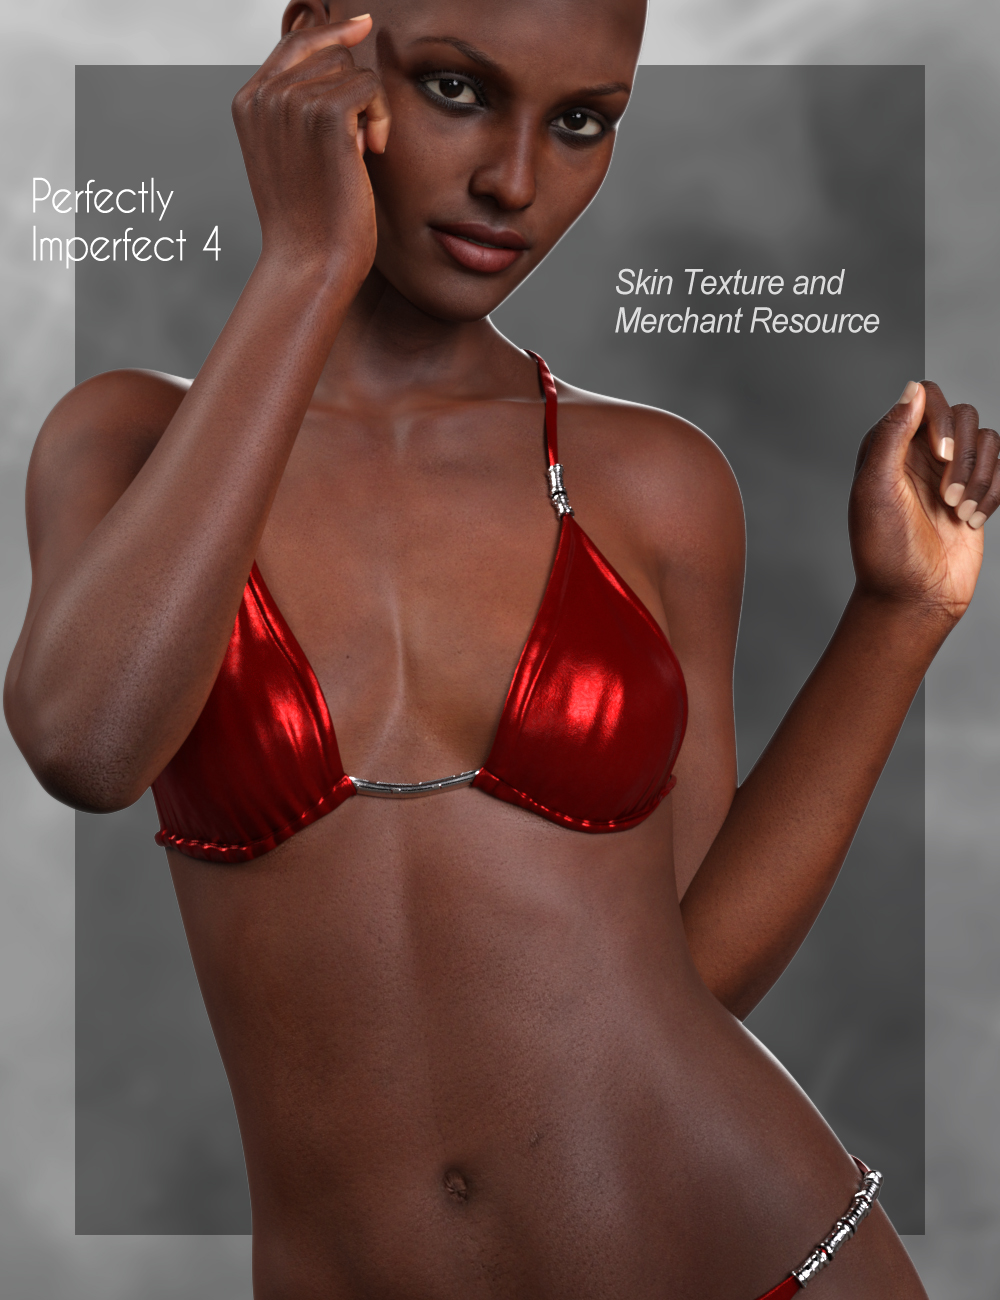 RY Perfectly Imperfect Skin 4 Merchant Resource For Genesis 8 1 Female